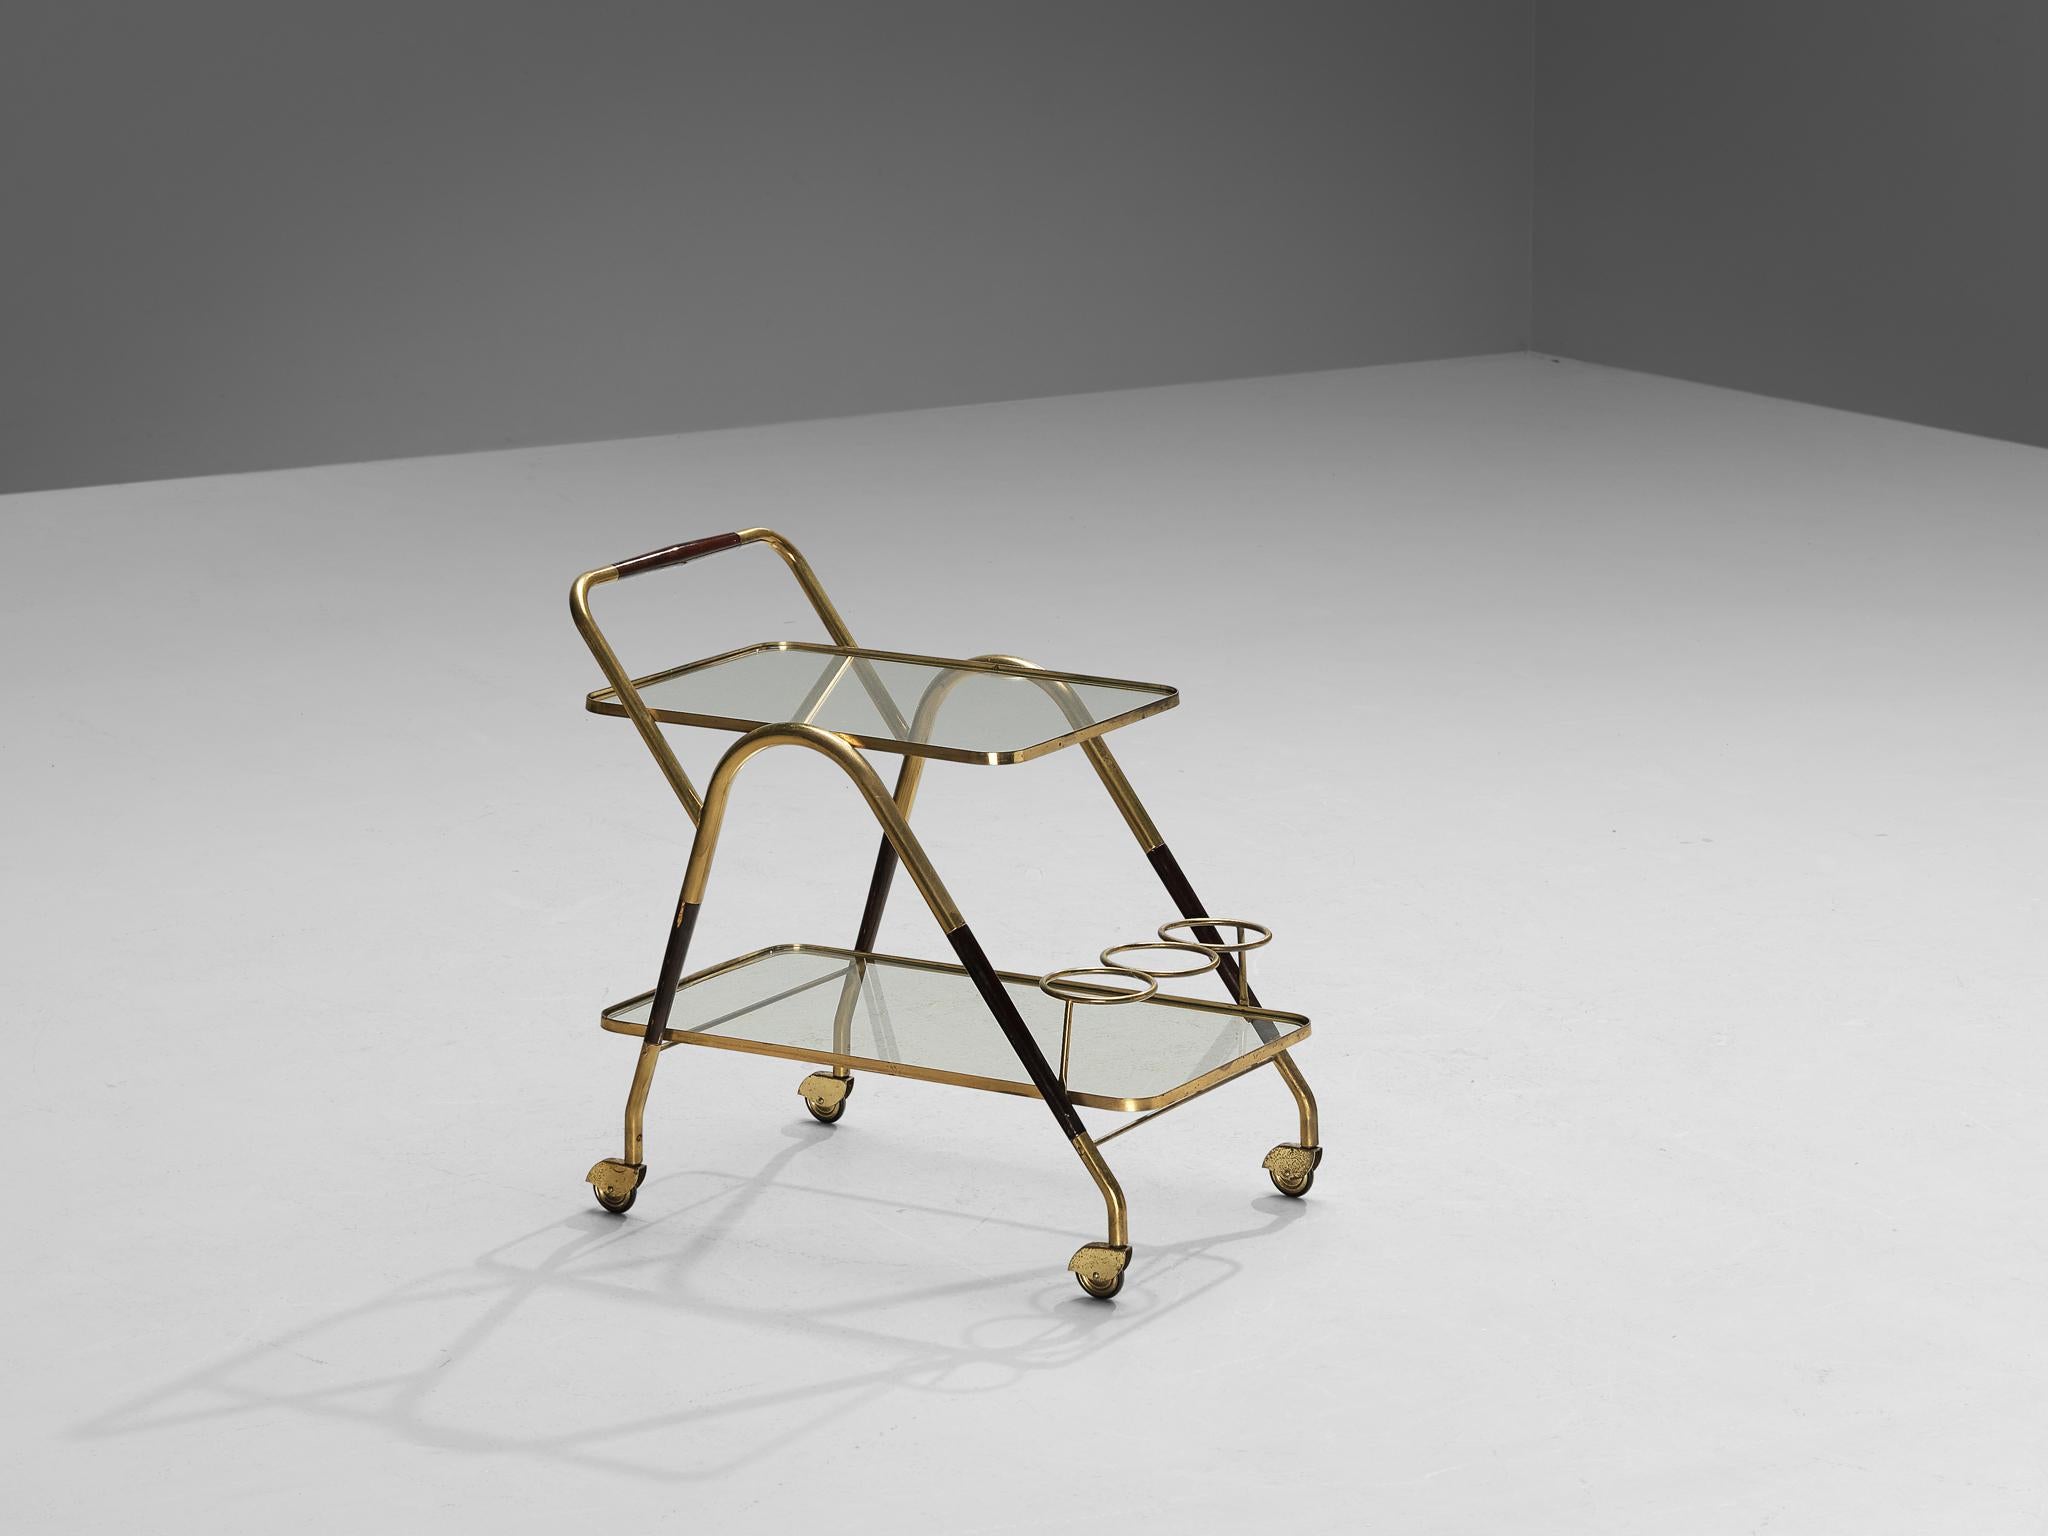 Bar cart, wood, brass, glass, Italy, 1950s

Elegant Italian serving trolley or liquor cart. The whole construction of this serving trolley is based on clear lines and round edges. Two glass trays establish plenty of space to serve your meals or